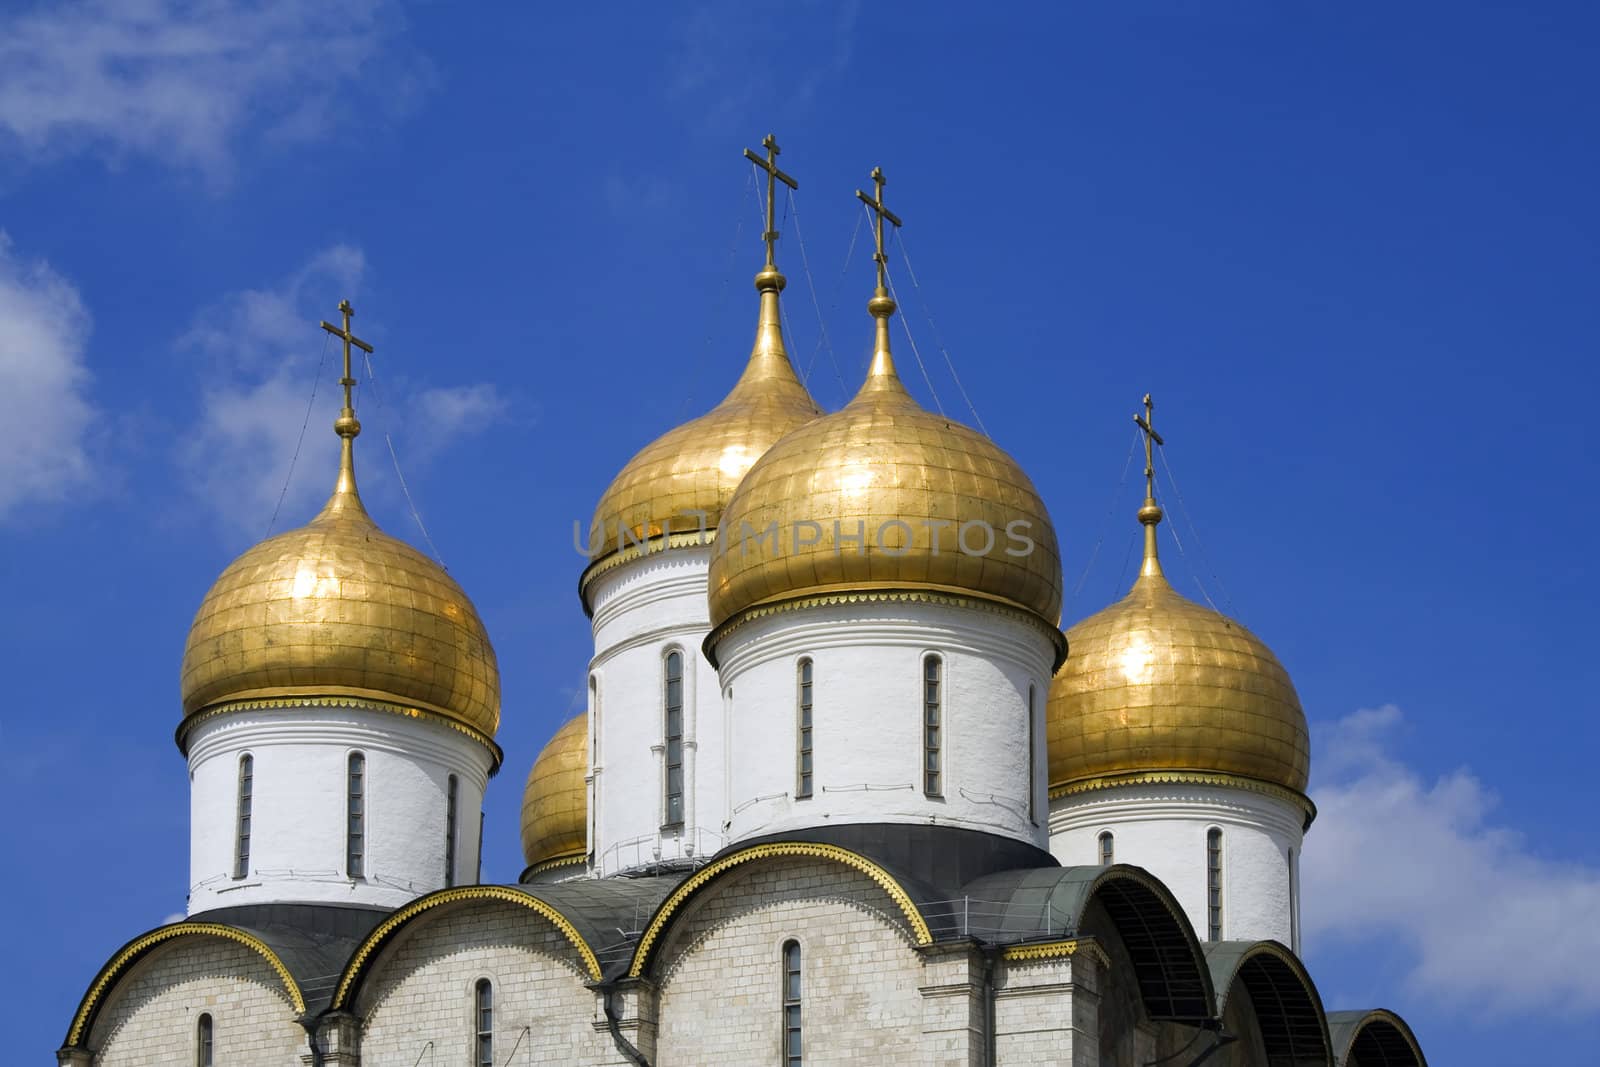 The Assumption Cathedral (Moscow Kremlin, Russia)

